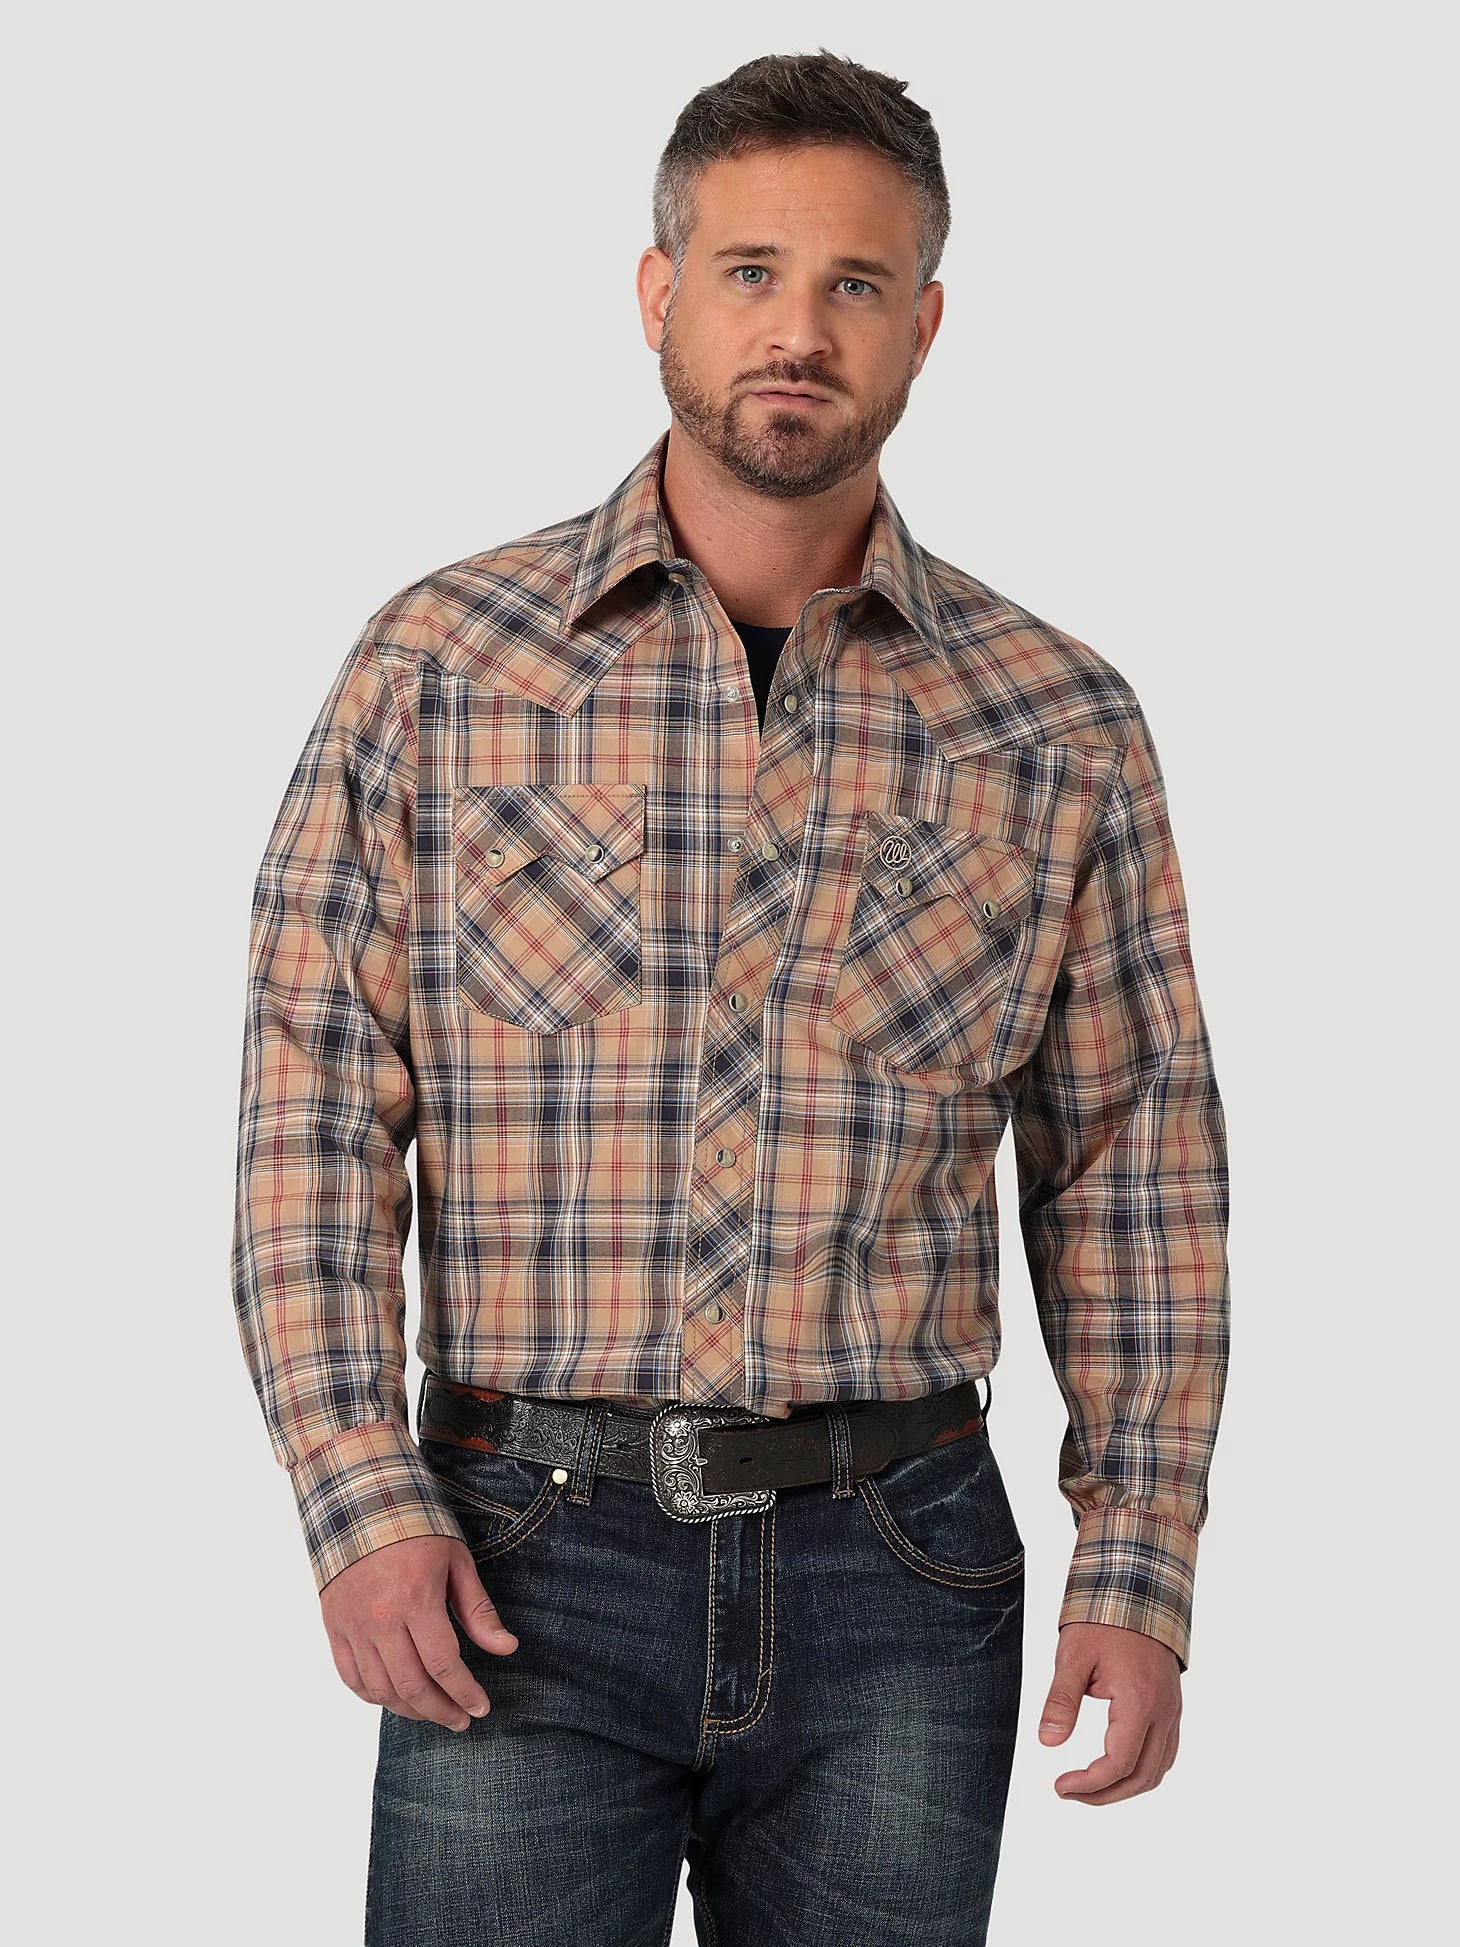 Centerville Western Stores - Men's Long Sleeve Western Shirts Tagged ...